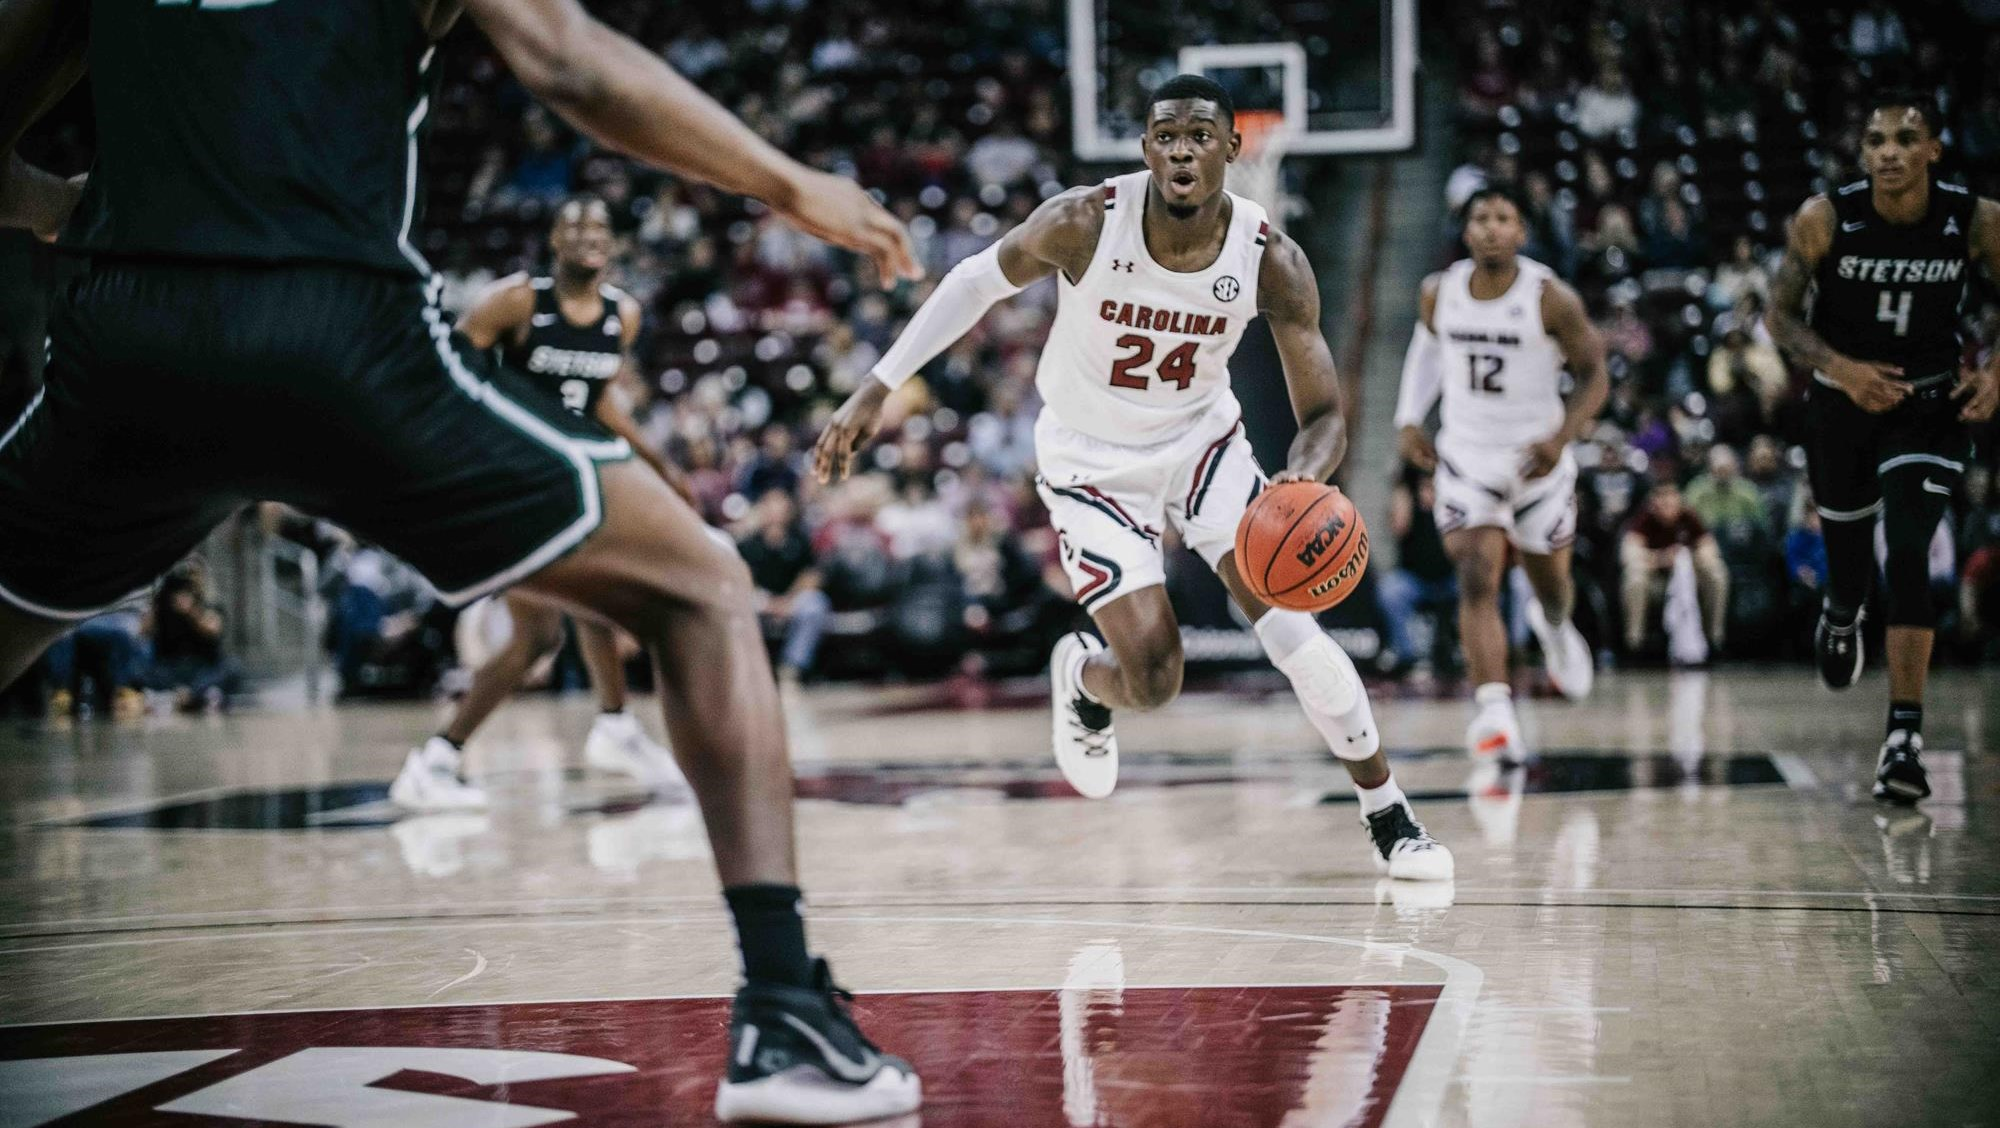 Gamecocks Suffer 63-56 Loss To Stetson